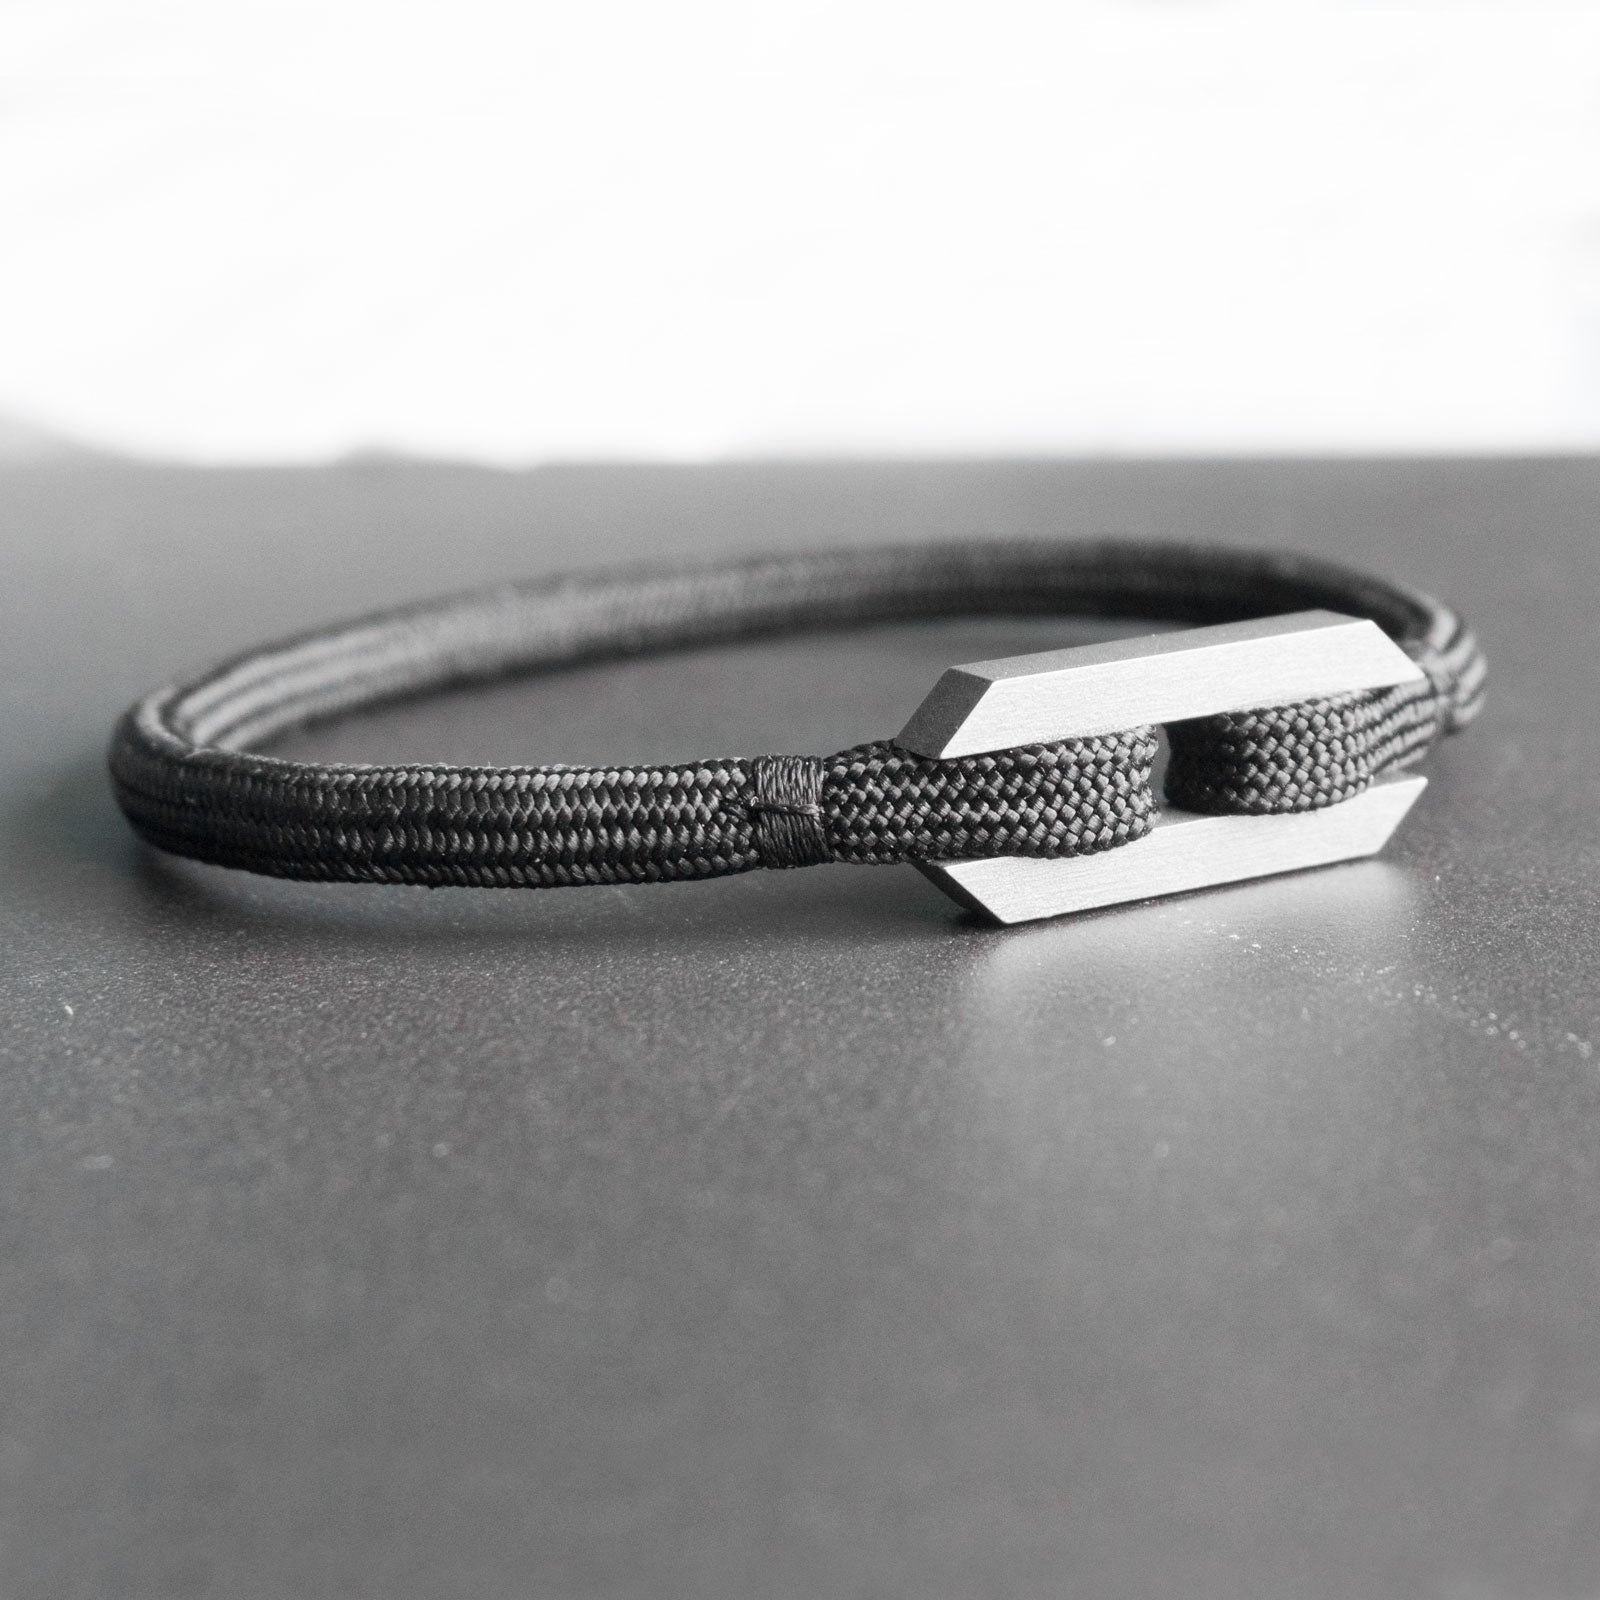 The Stoa bracelet in titanium stands for simplicity, purity and a seamless appearance. Taking its name from the eponymous greek walkways, the rope feels as it was surrounded and protected by 2 imposing pillars, with no visible opening mechanism. The bracelet is handmade from grade 5 titanium and a nearly indestructible rope.